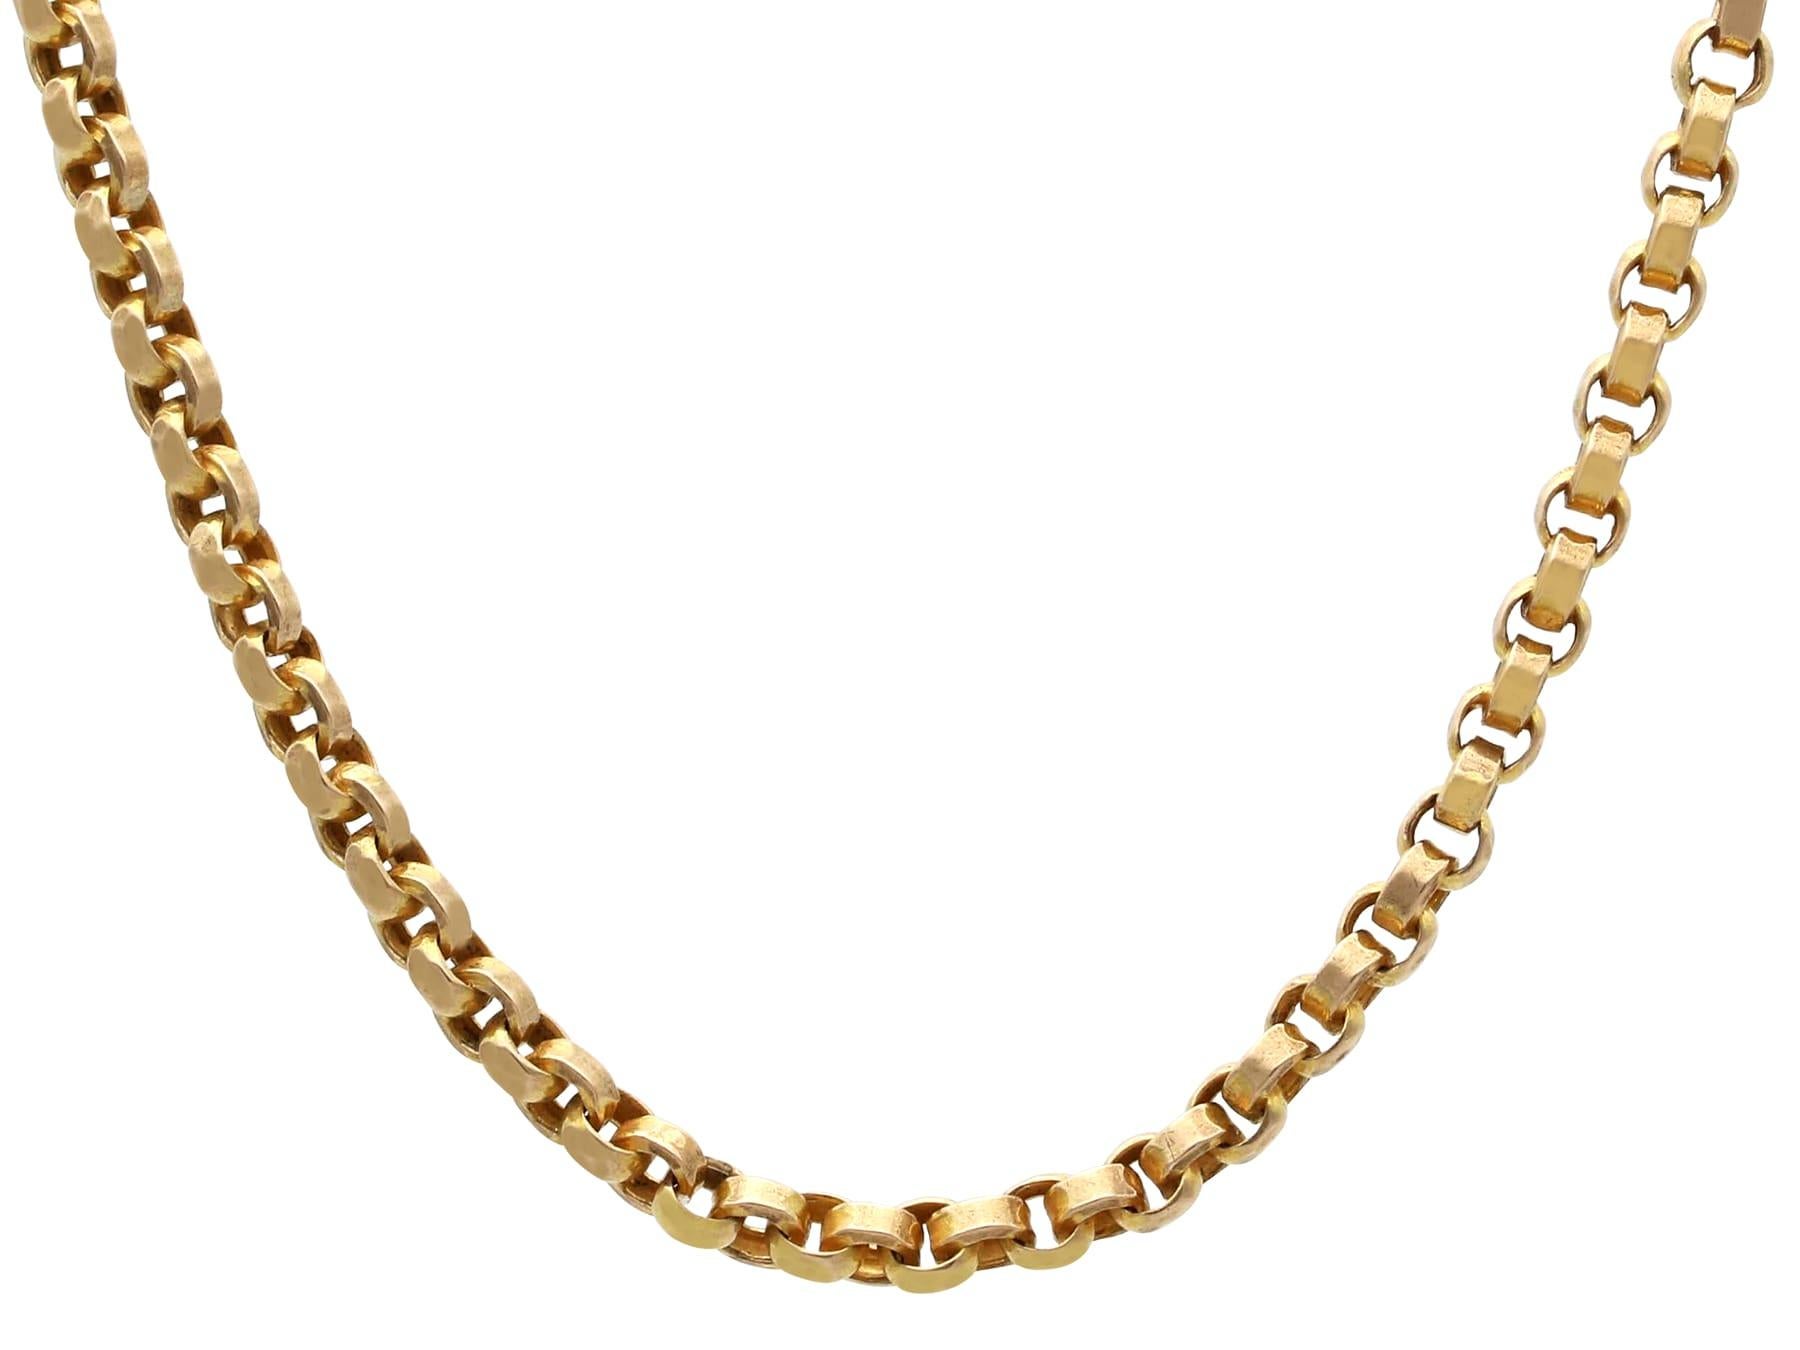 Antique 9 Carat Yellow Gold Longuard Chain - Circa 1890 In Excellent Condition For Sale In Jesmond, Newcastle Upon Tyne